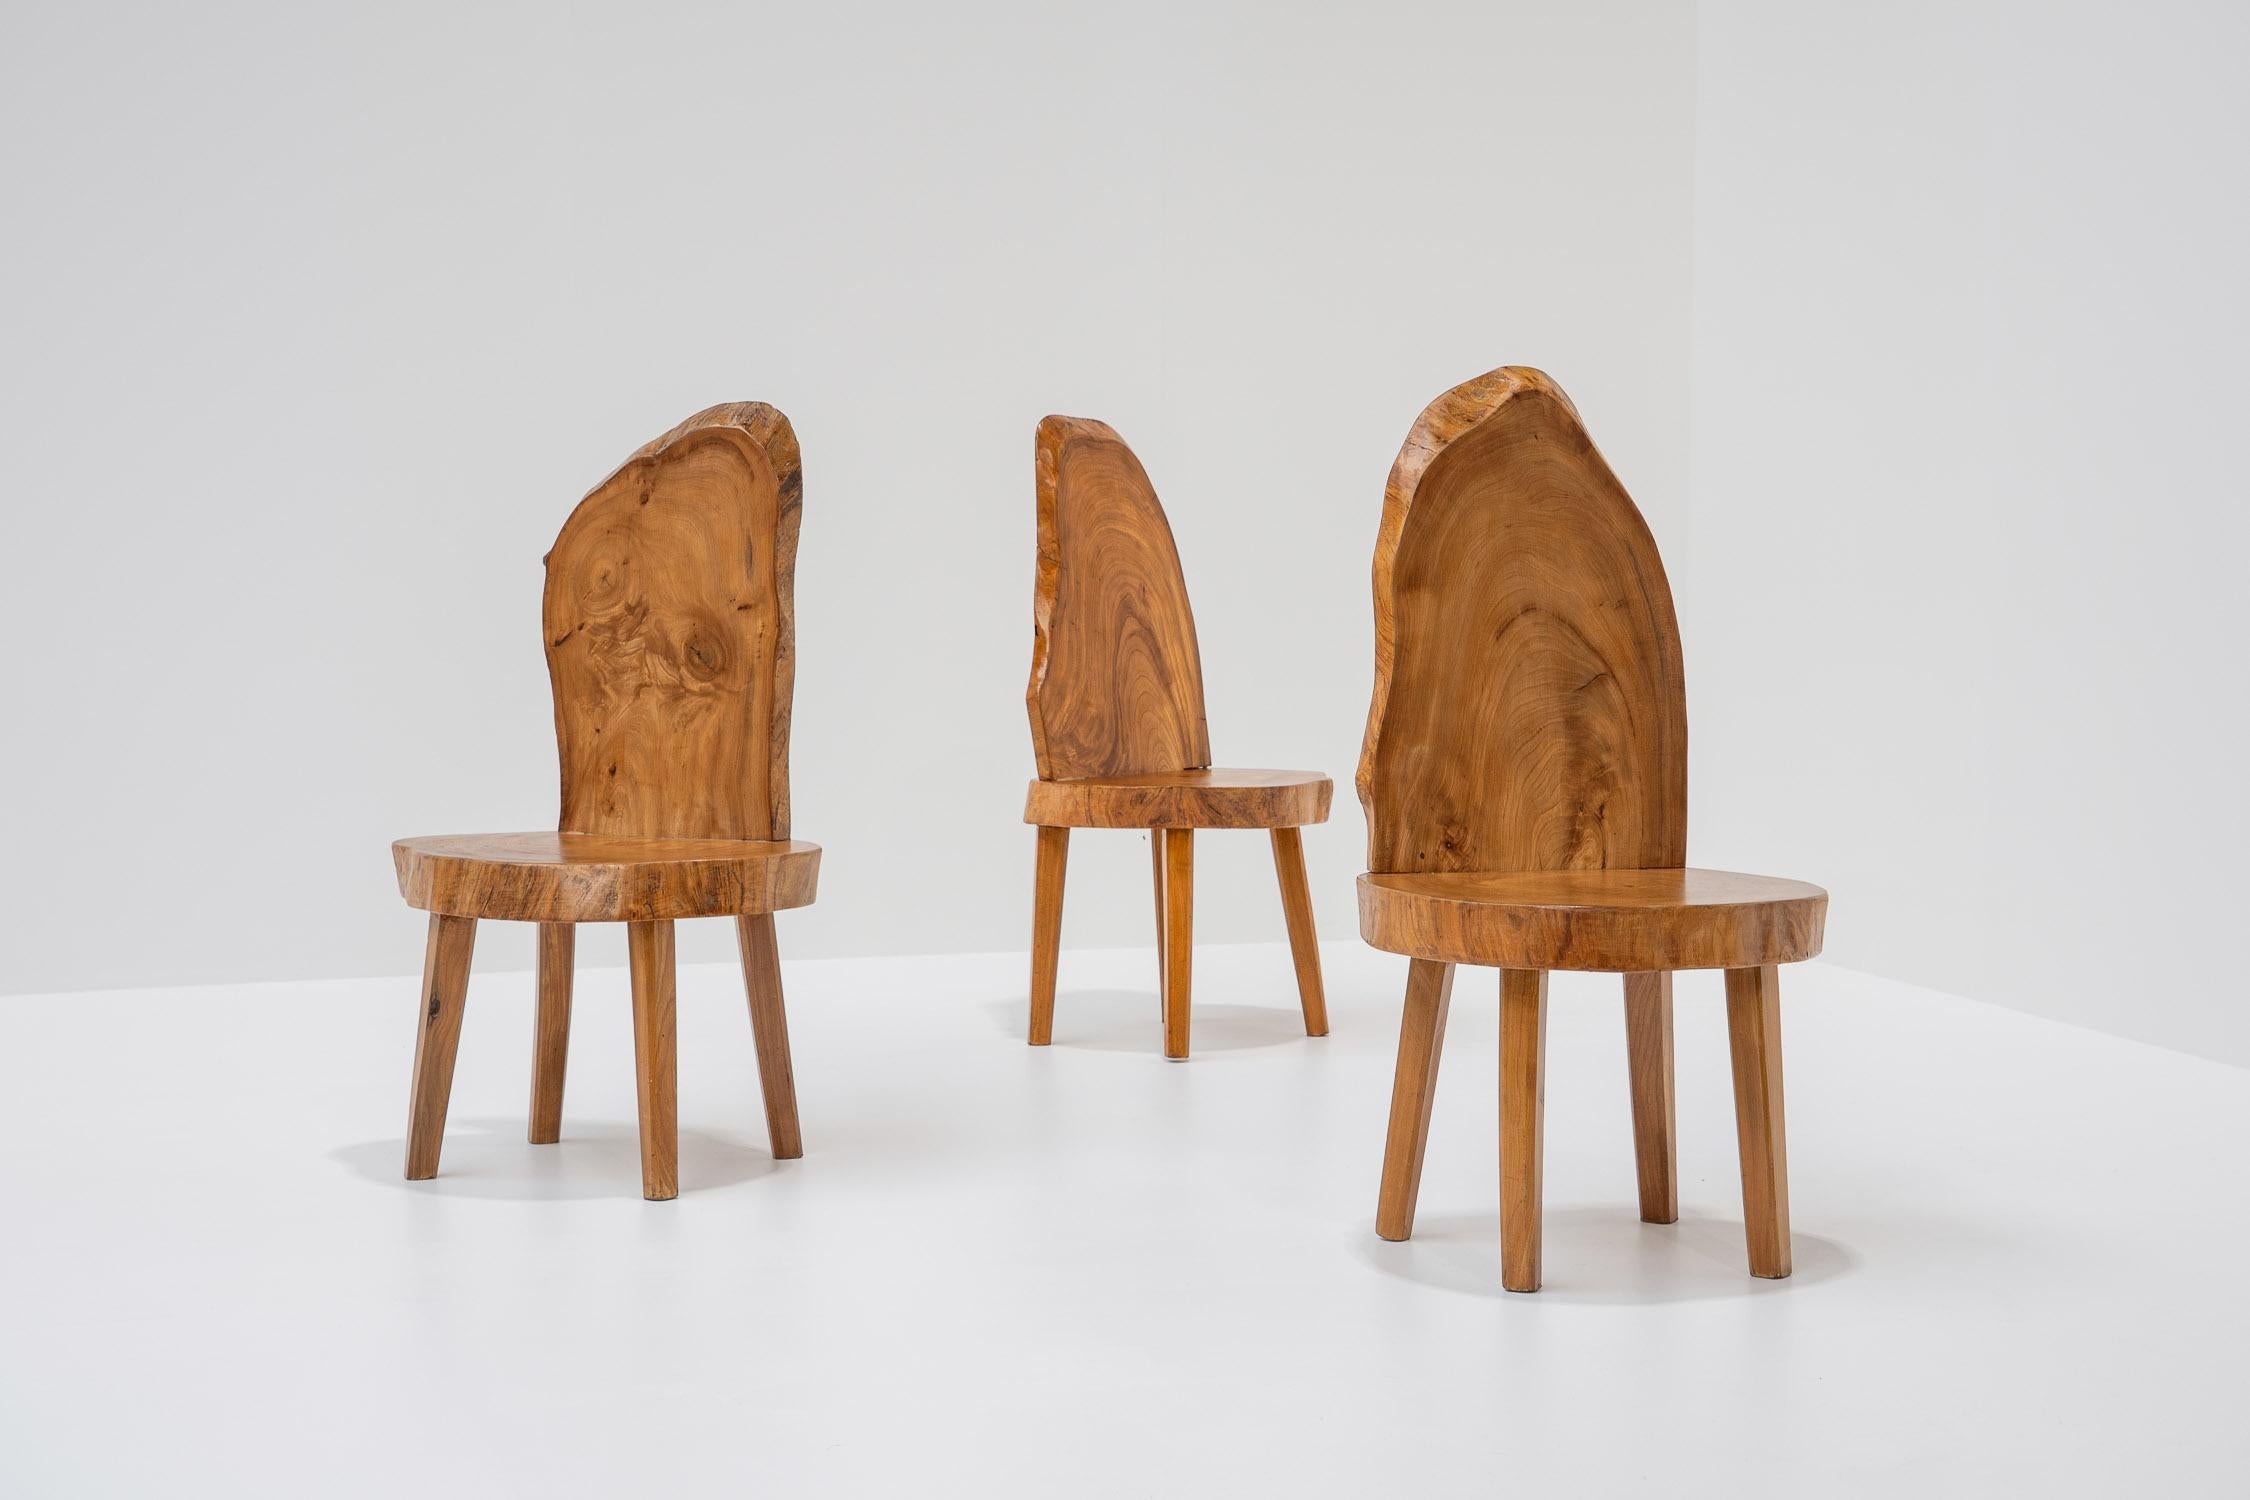 Crafted from solid tree trunks, each chair tells its own story. The natural imperfections and unique grains of the wood make no two chairs exactly alike. Each piece has its organic, live edge shape. Their imperfections make them the perfect item to